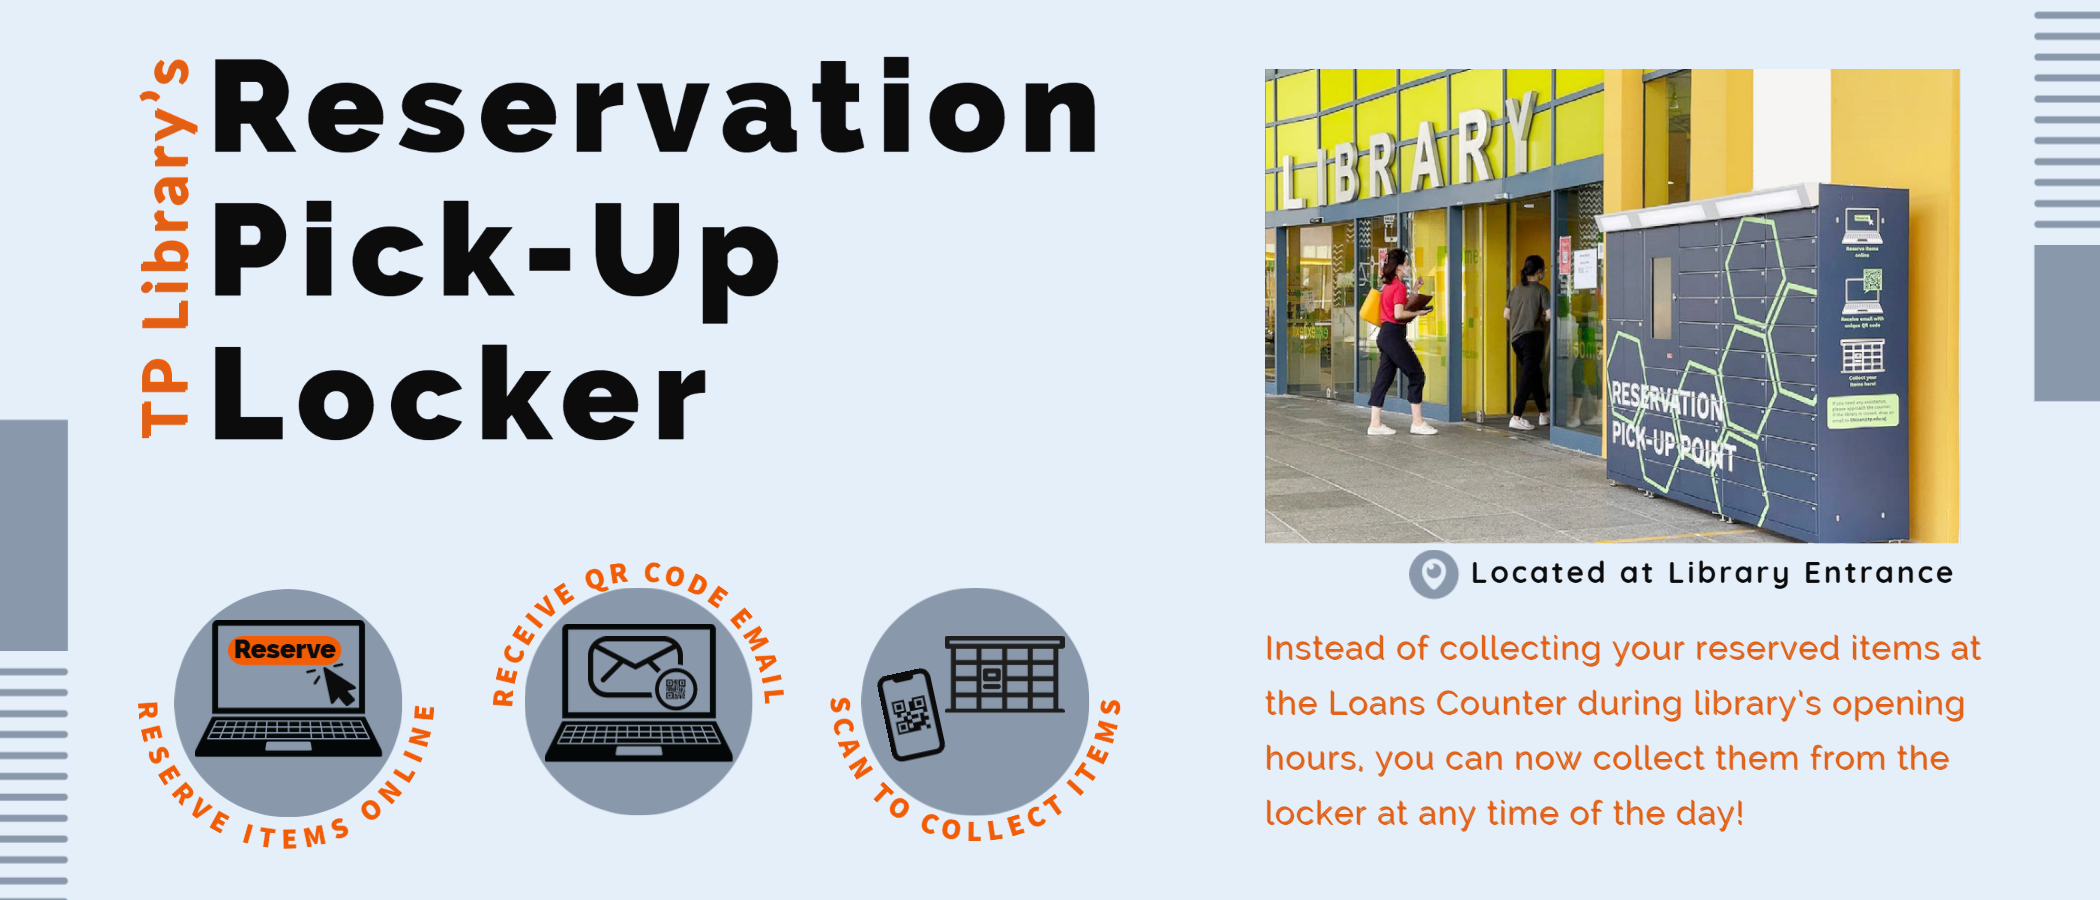 Introducing TP Library’s Reservation Pick-Up Locker!